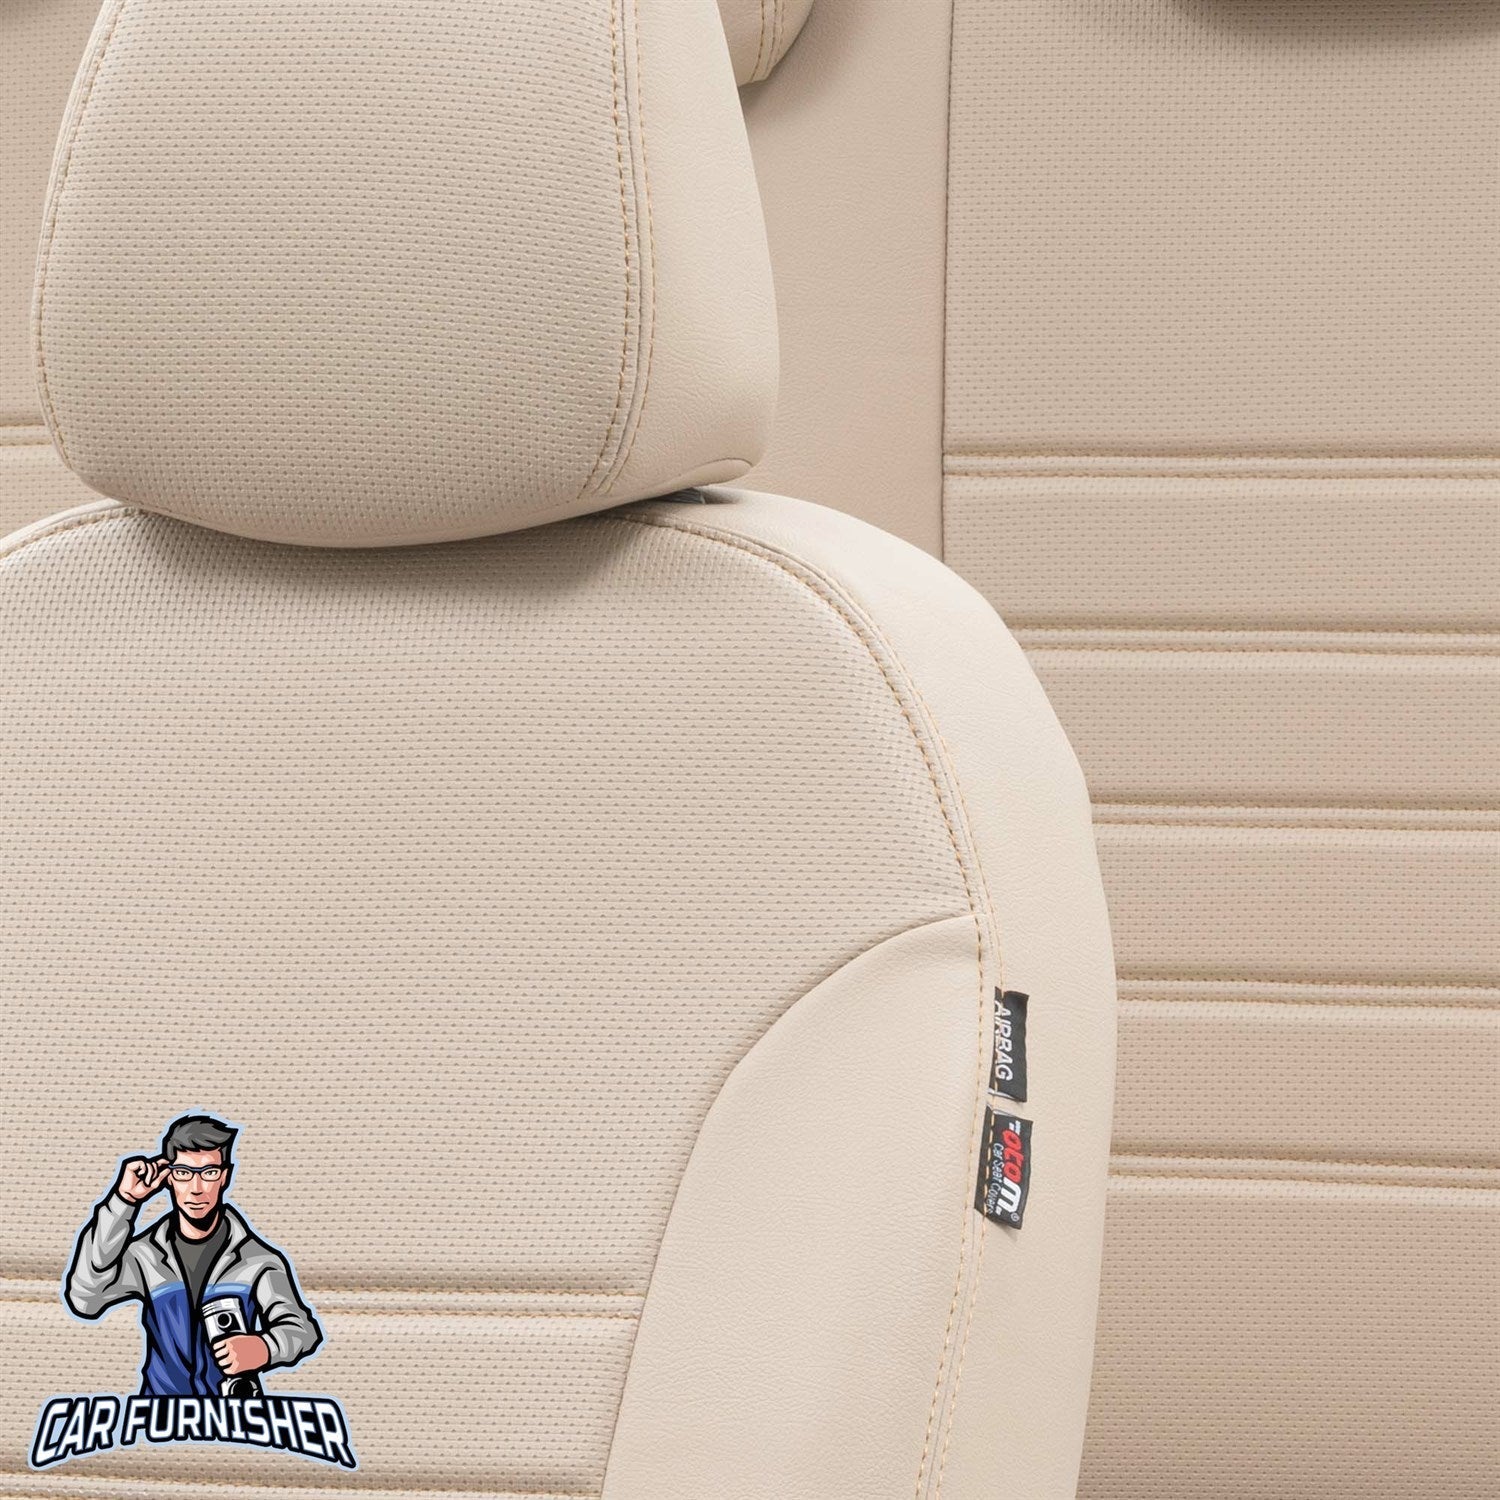 Dacia Dokker Seat Covers New York Leather Design Beige Leather